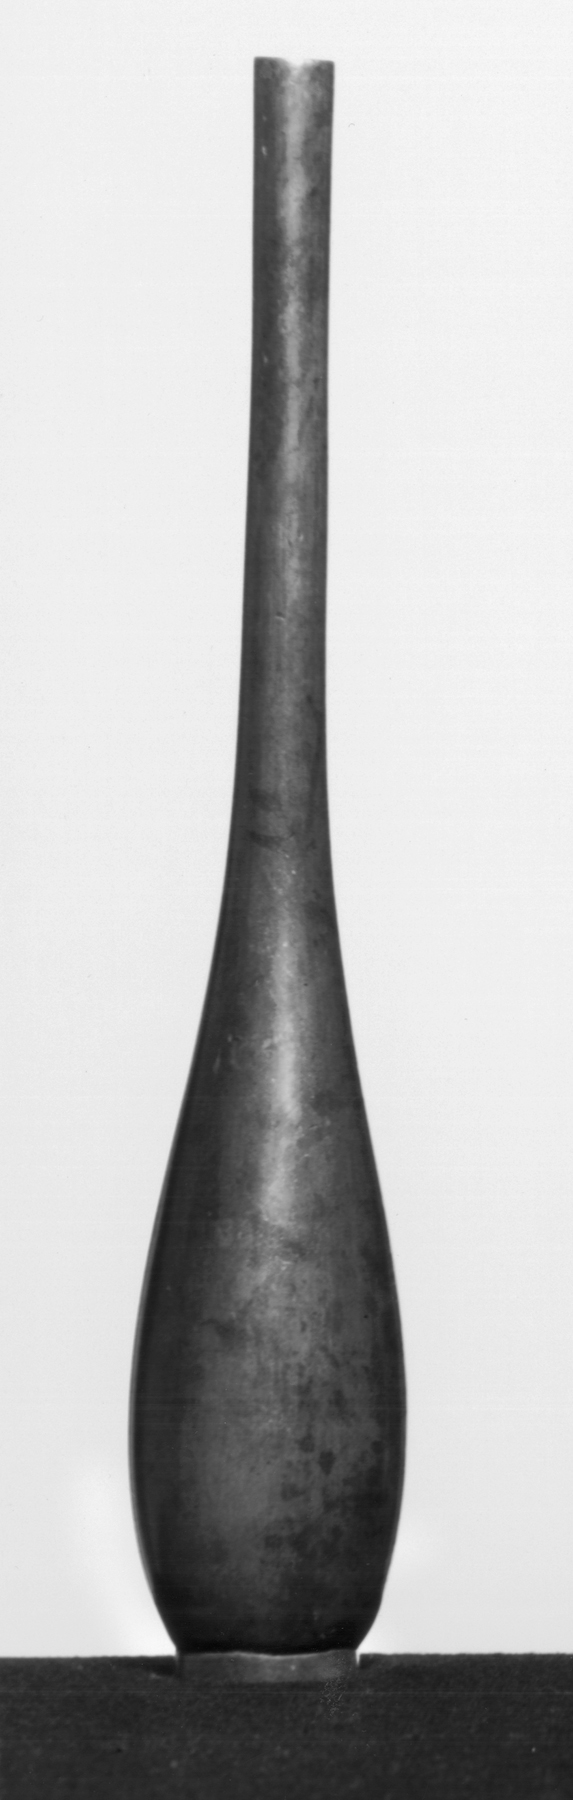 Image for Oviform Bottle with a Long Neck